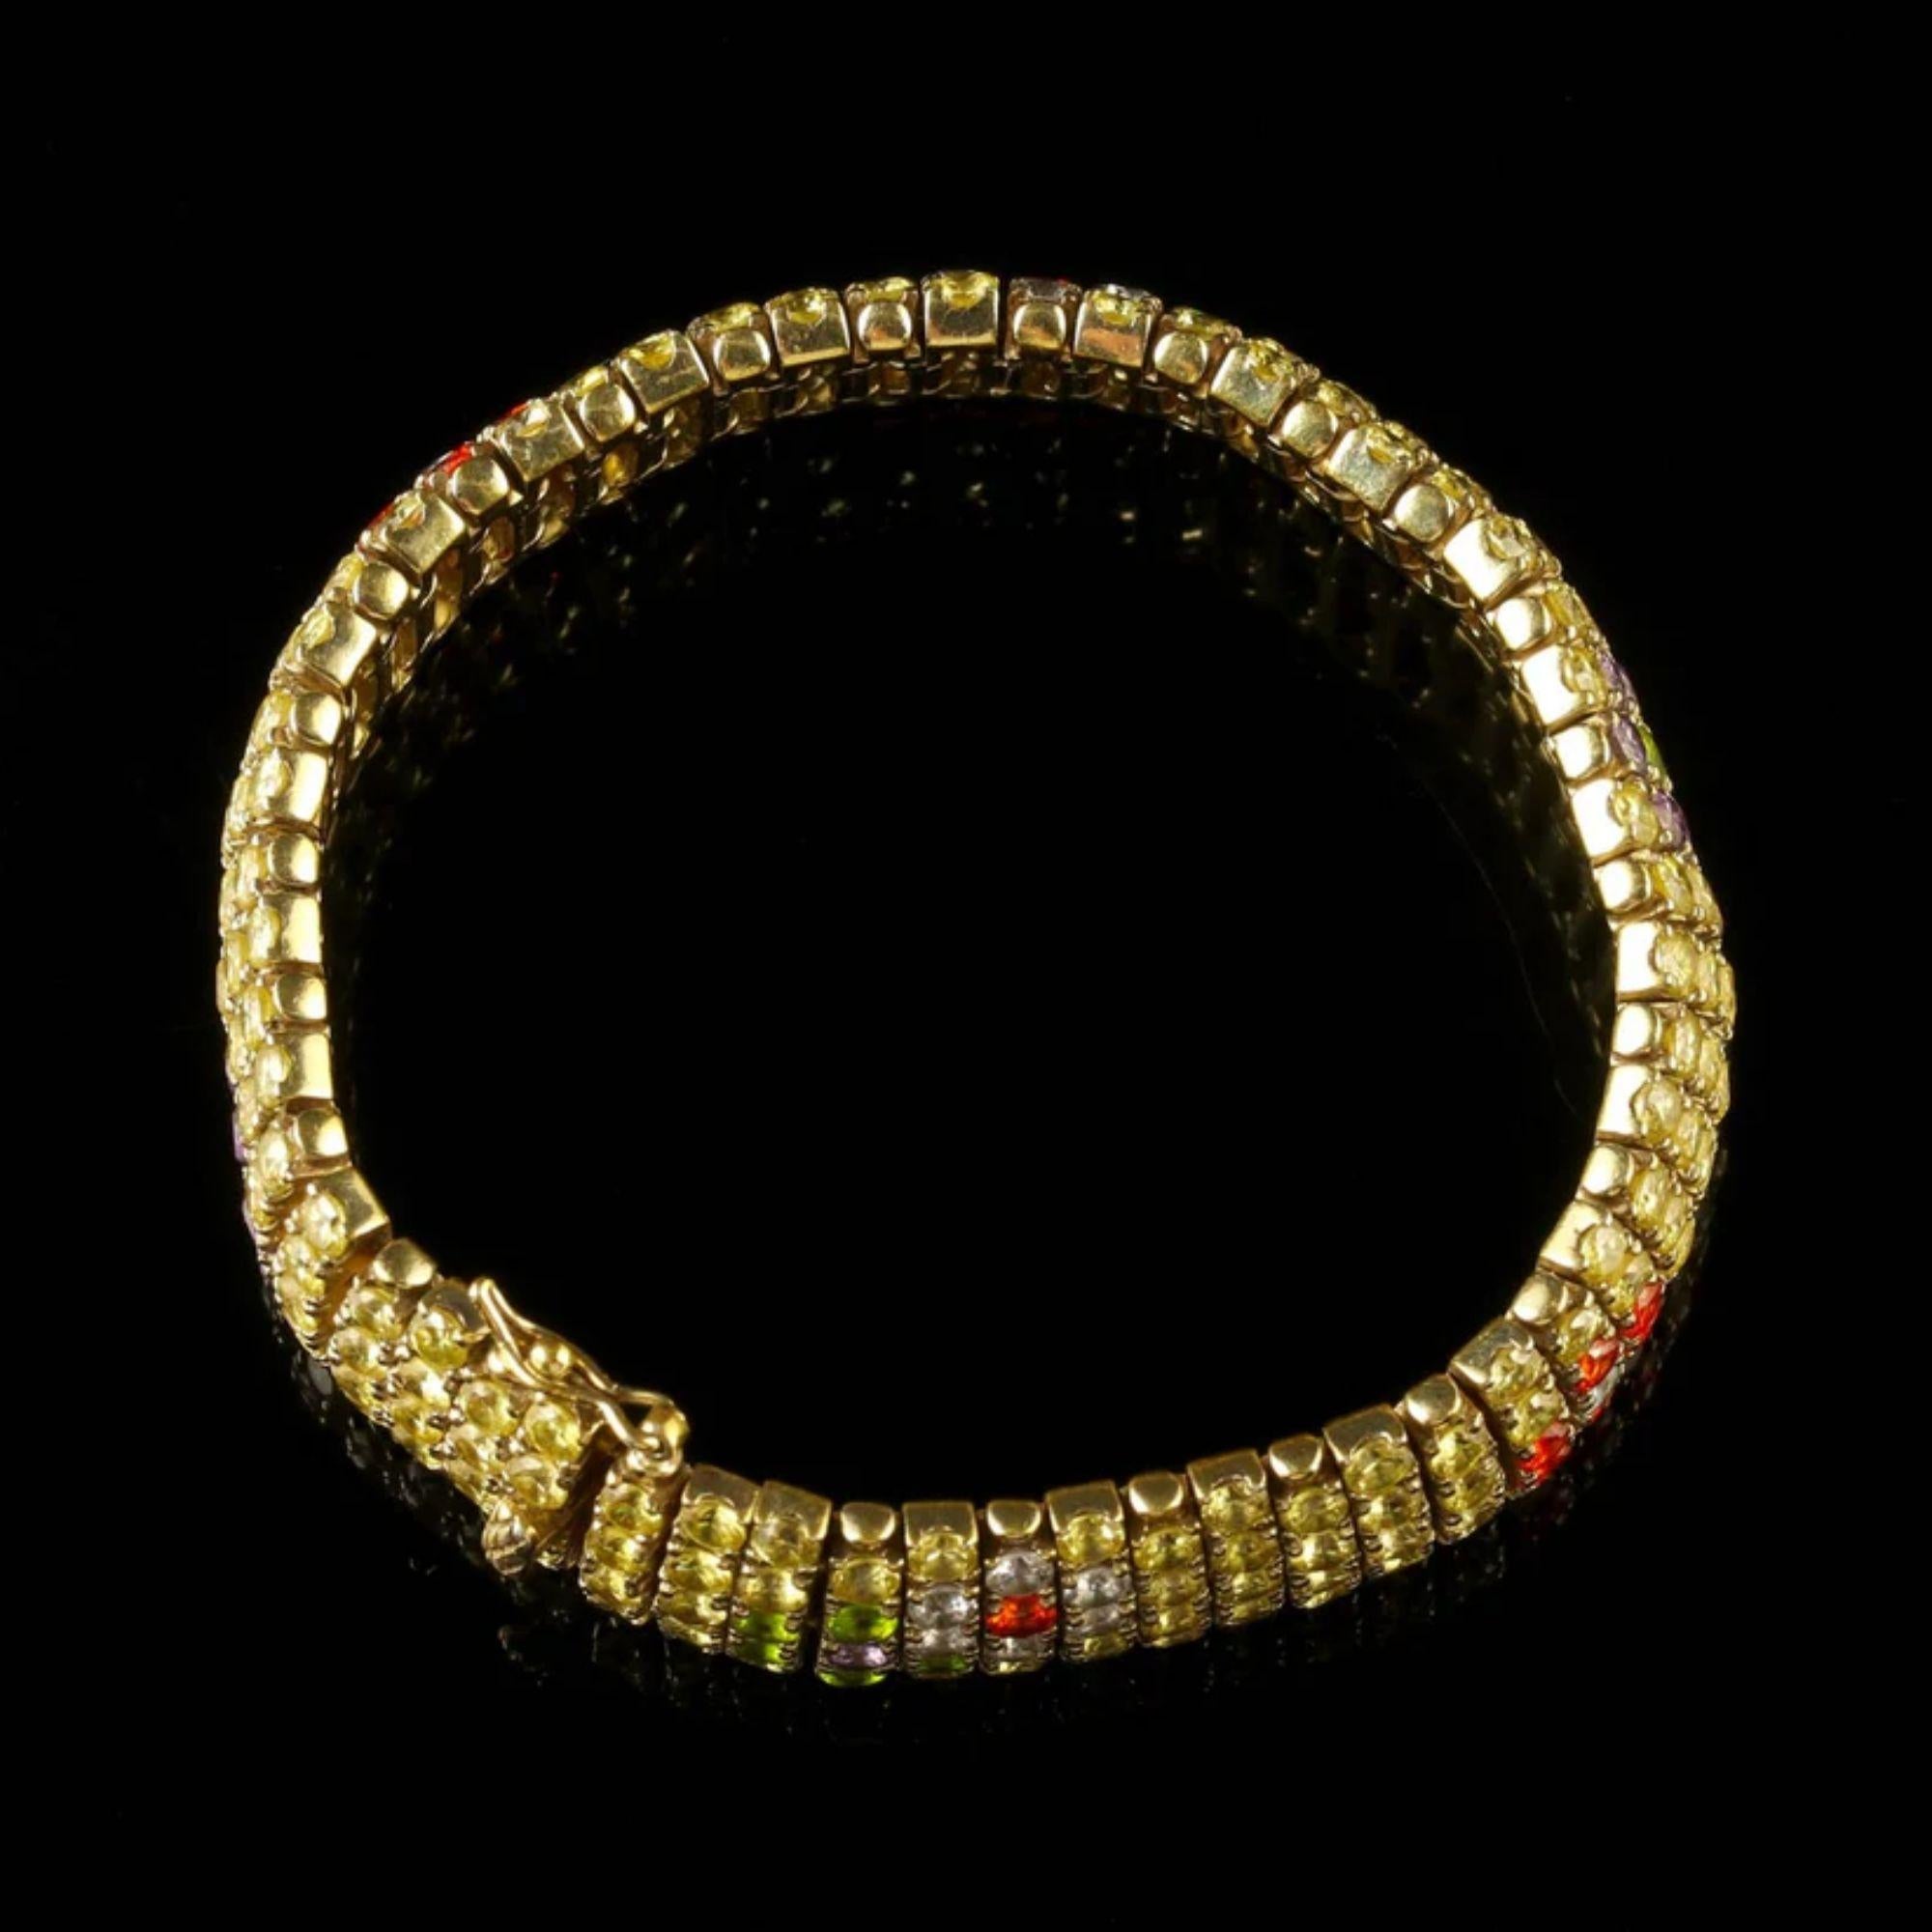 A remarkable vintage cubic zirconia bracelet made by Italian jewellers Ultima Edizione in the late 20th Century. The band is pave set with a dazzling array of golden yellow zirconia with clusters of multi-coloured stones depicting a series of